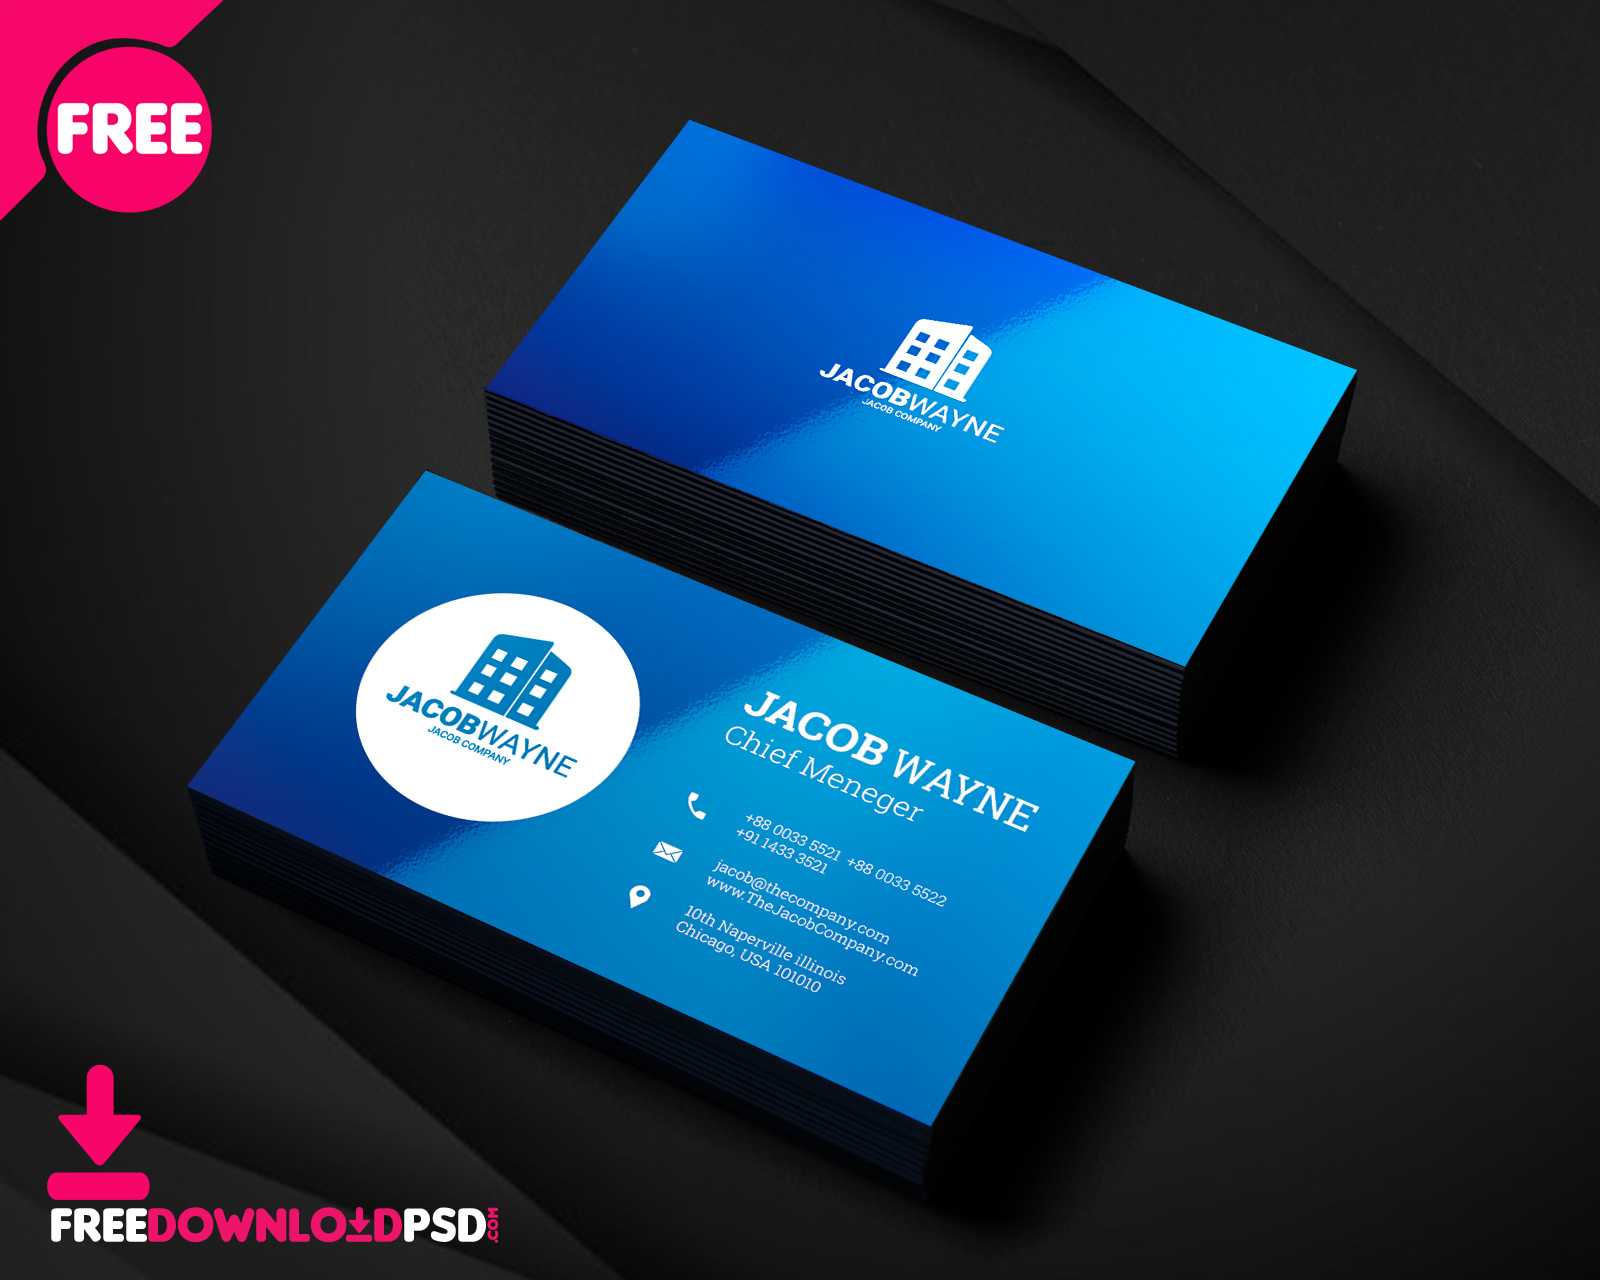 Real Estate Business Card Psd | Freedownloadpsd Within Name Card Photoshop Template